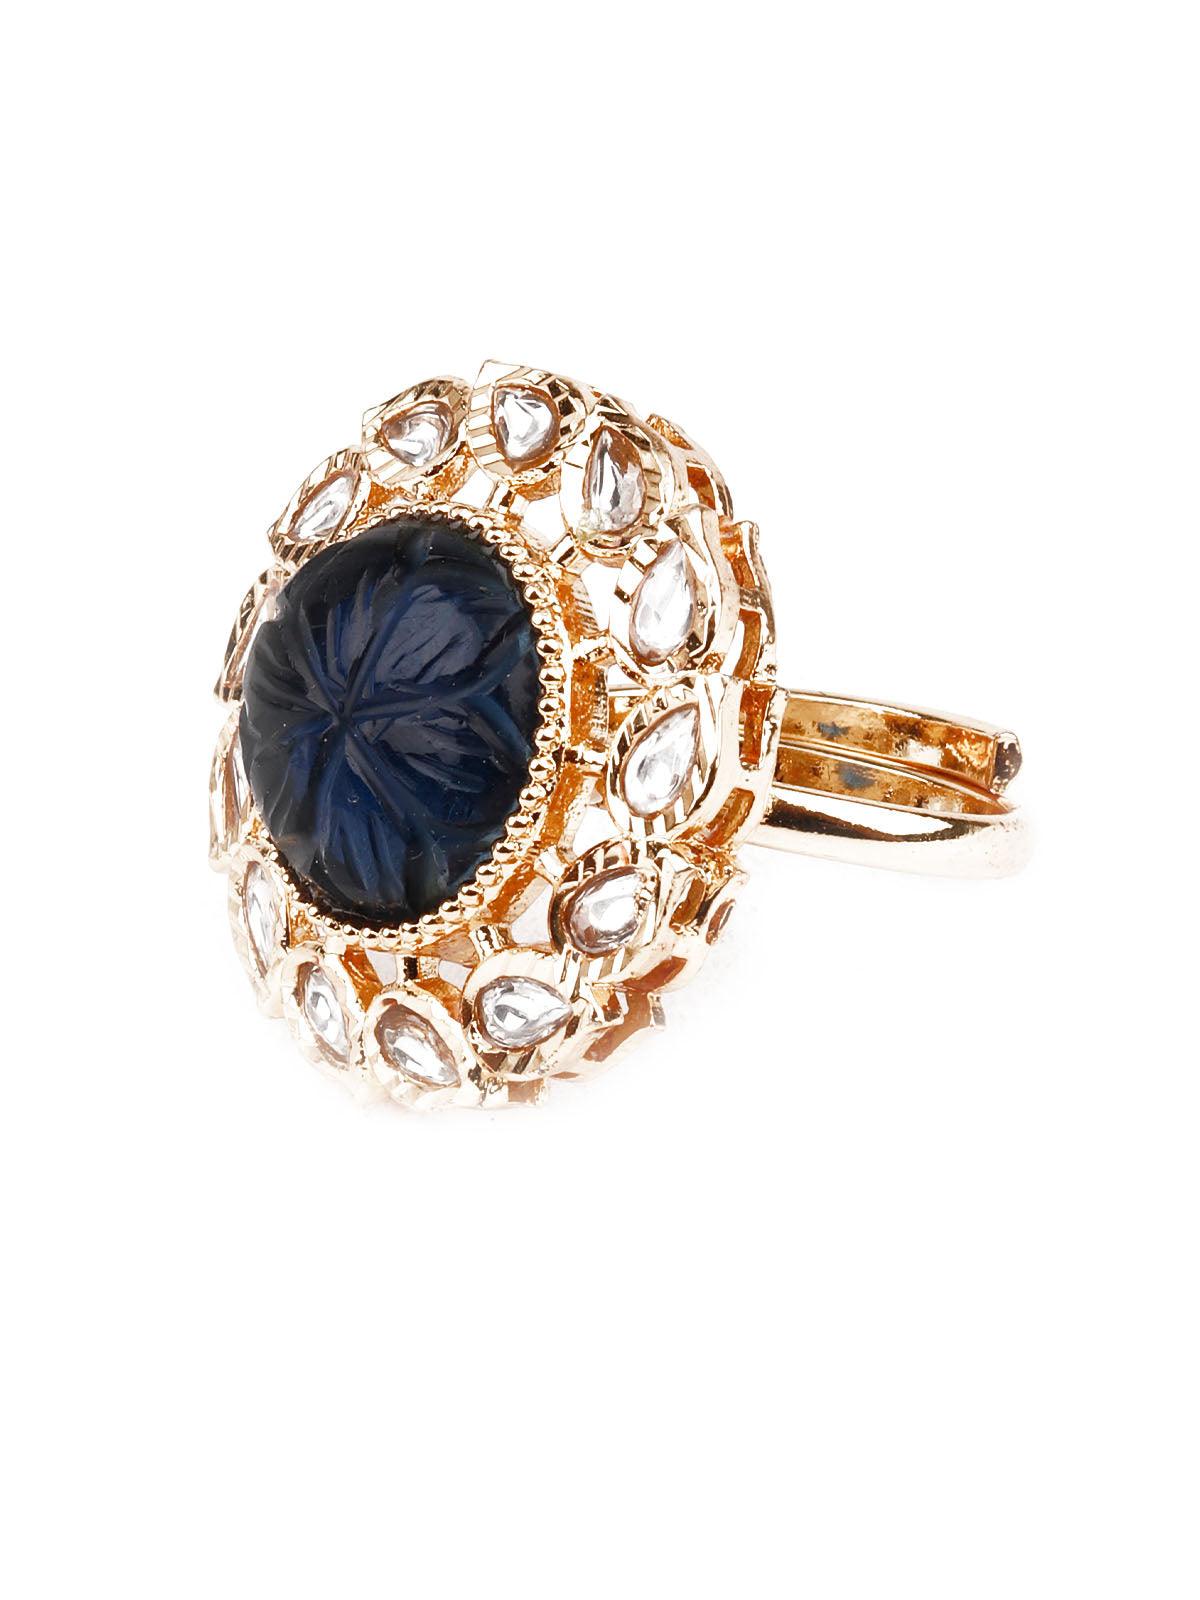 BLACK AND GOLD STYLISH RING - Odette